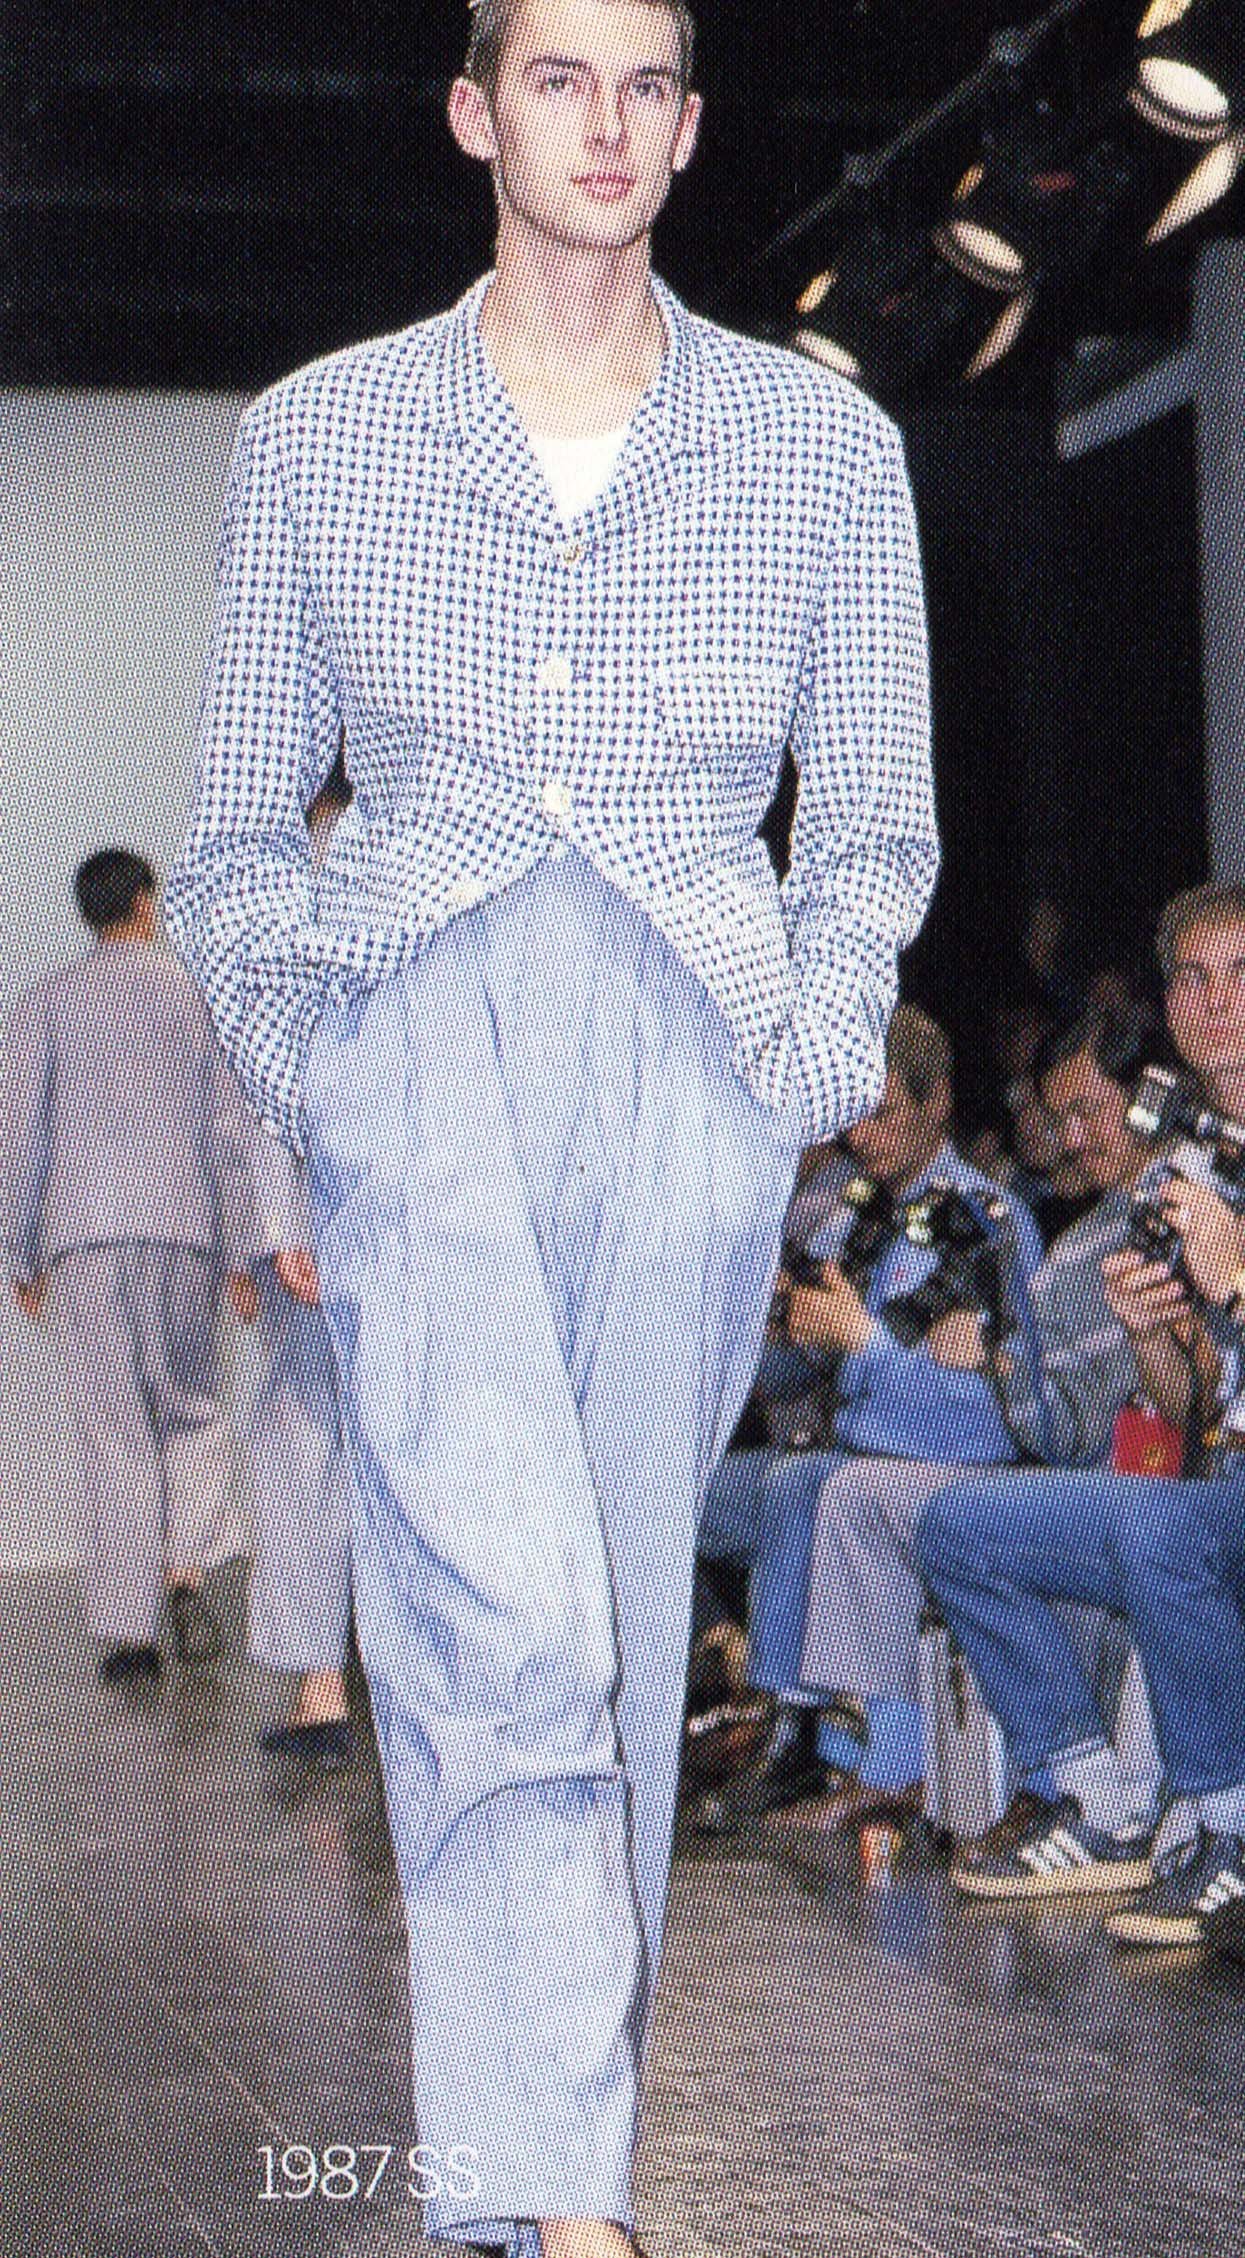 Yohji Yamamoto POUR HOMME, Spring/Summer 1987 — My Clothing Archive